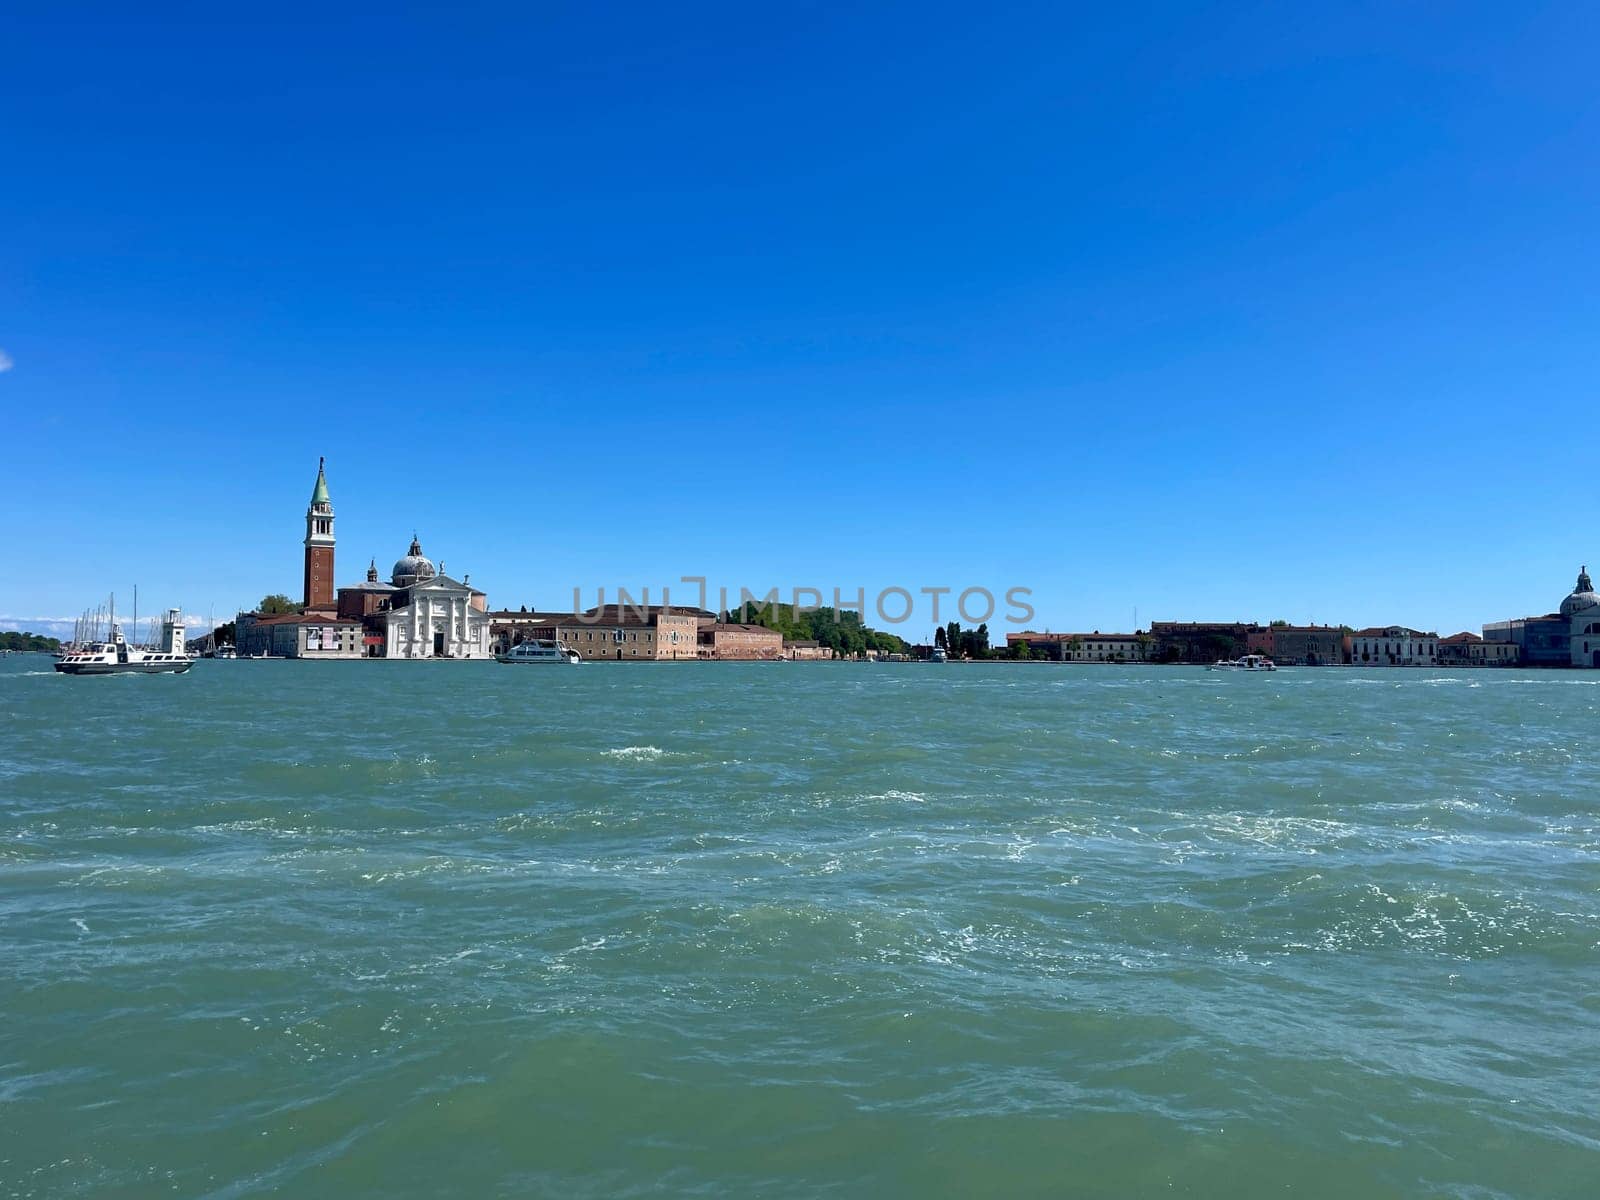 San Giorgio Maggiore is one of the most famous islands in the Venetian lagoon. High quality photo